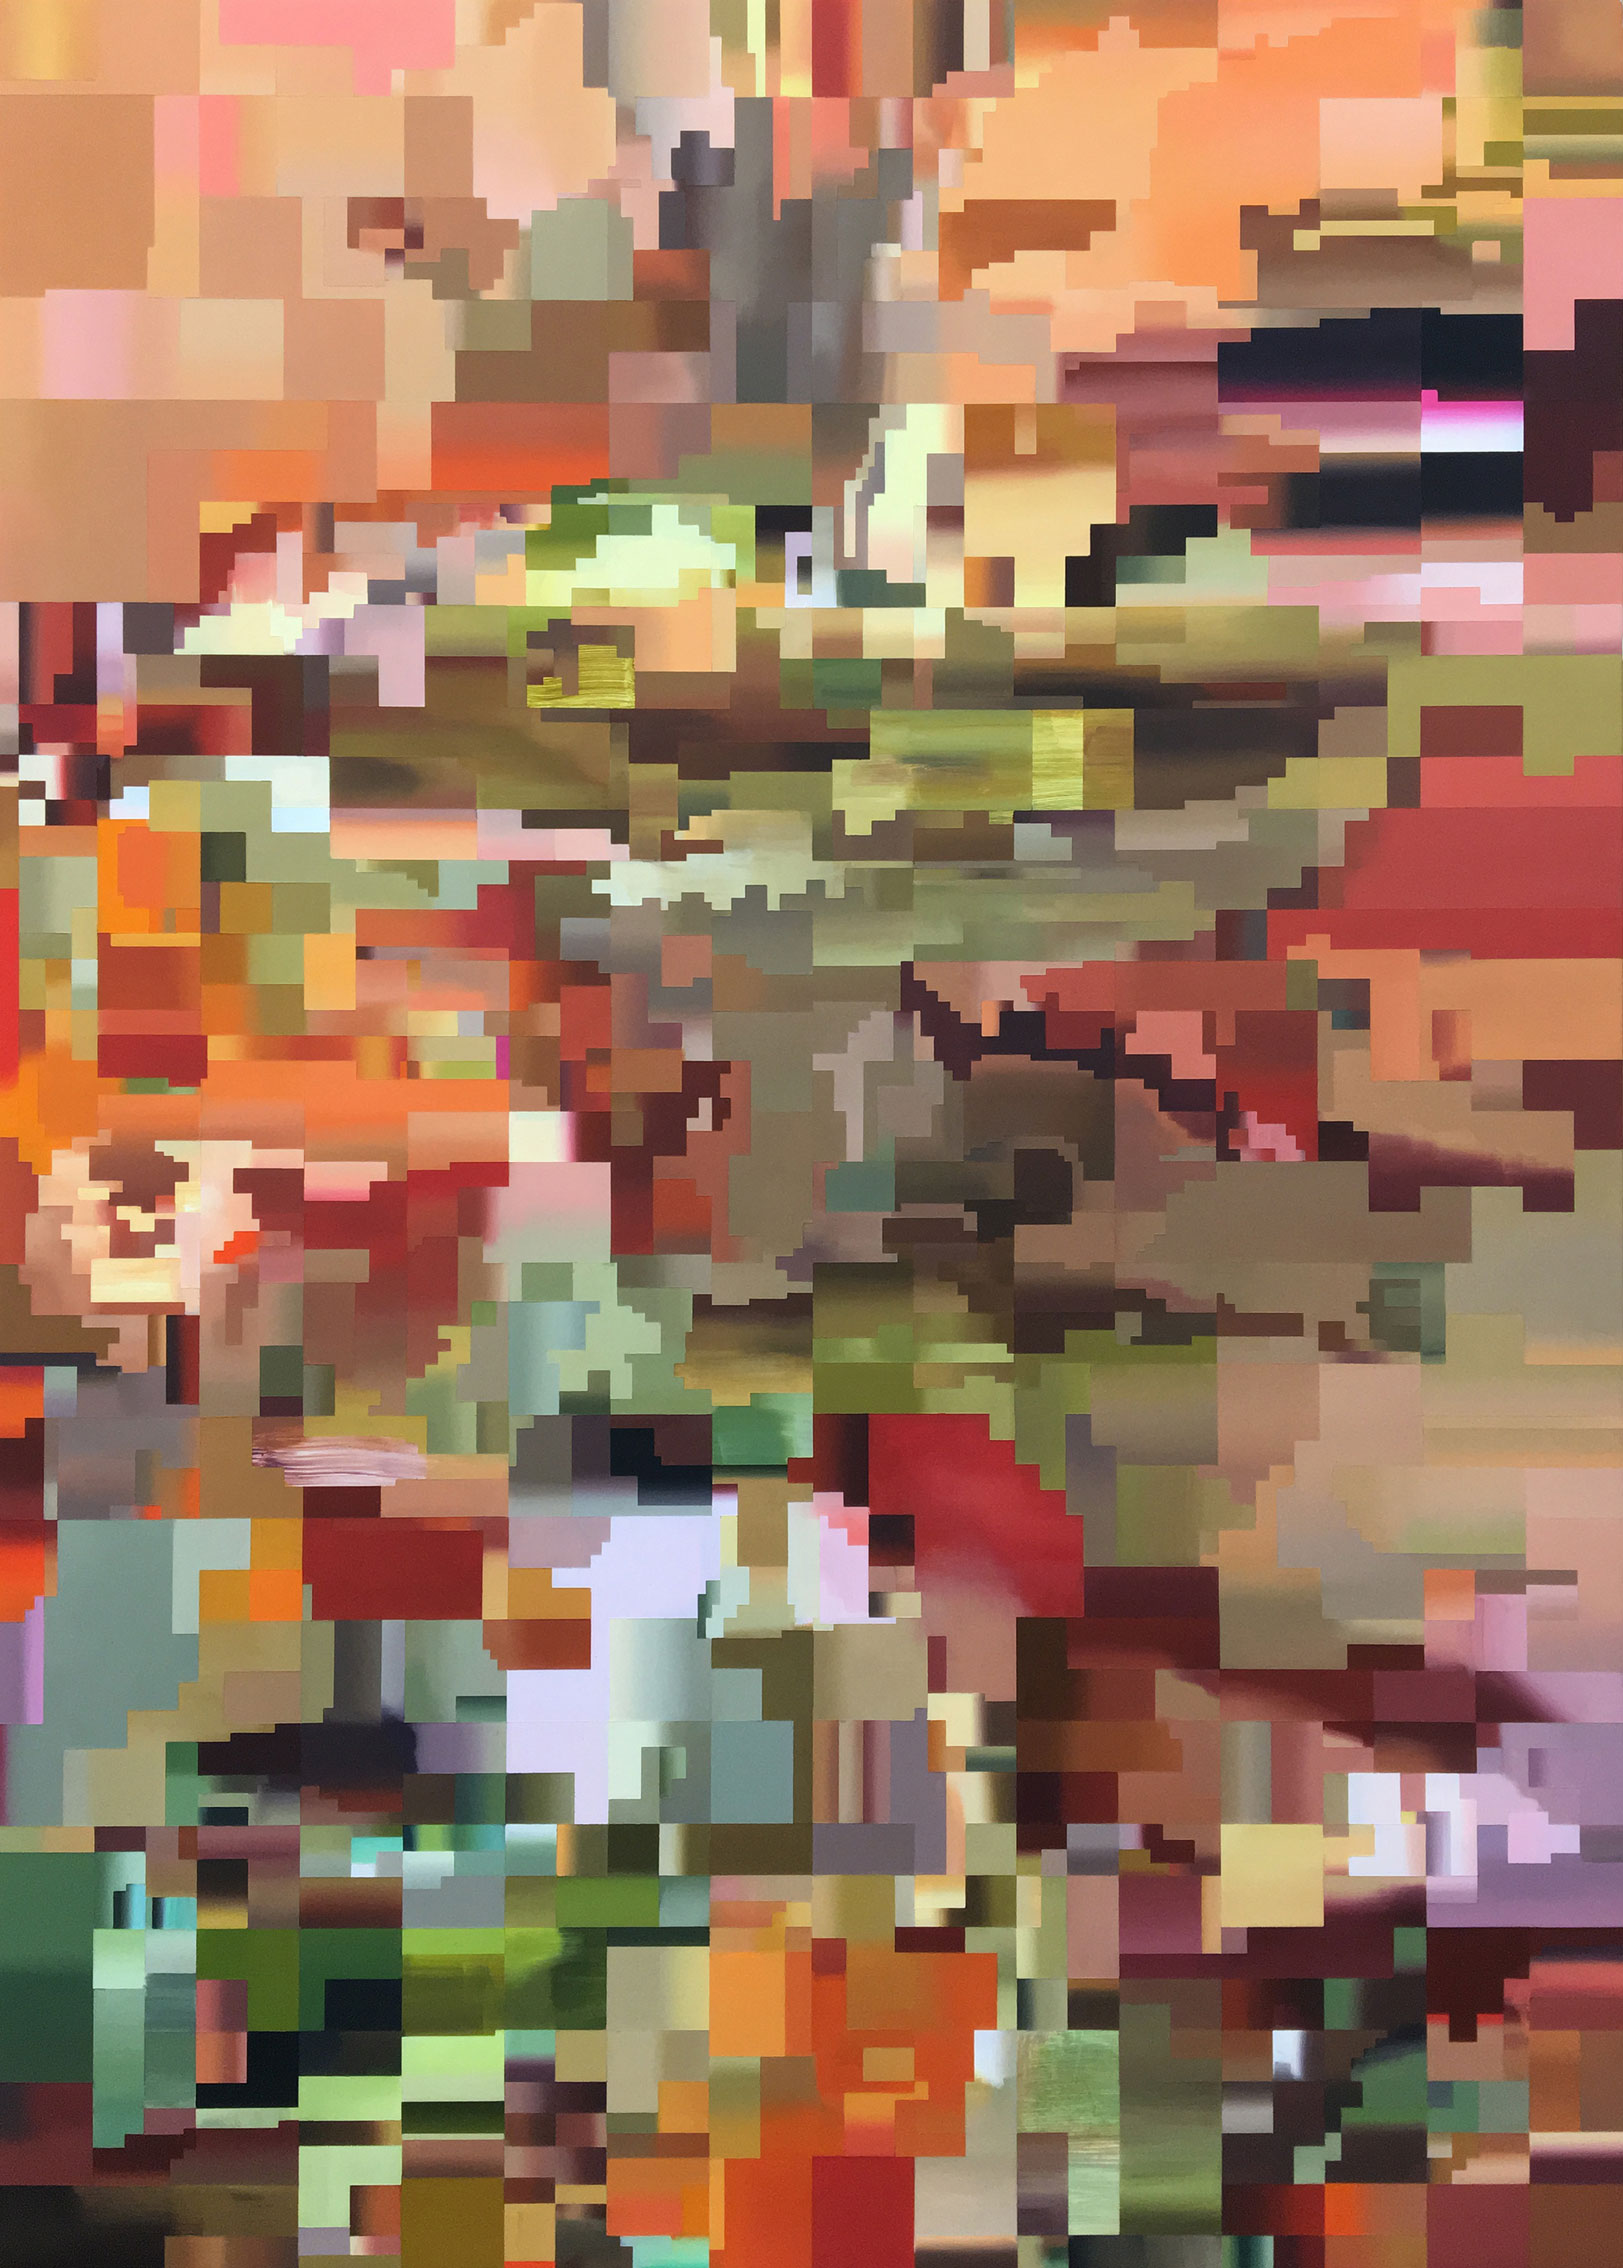 Oil painting by artist and painter Paul Lemmon in muted colours of olive, brown and gold depicting a pixelated frame from a glitched digital video